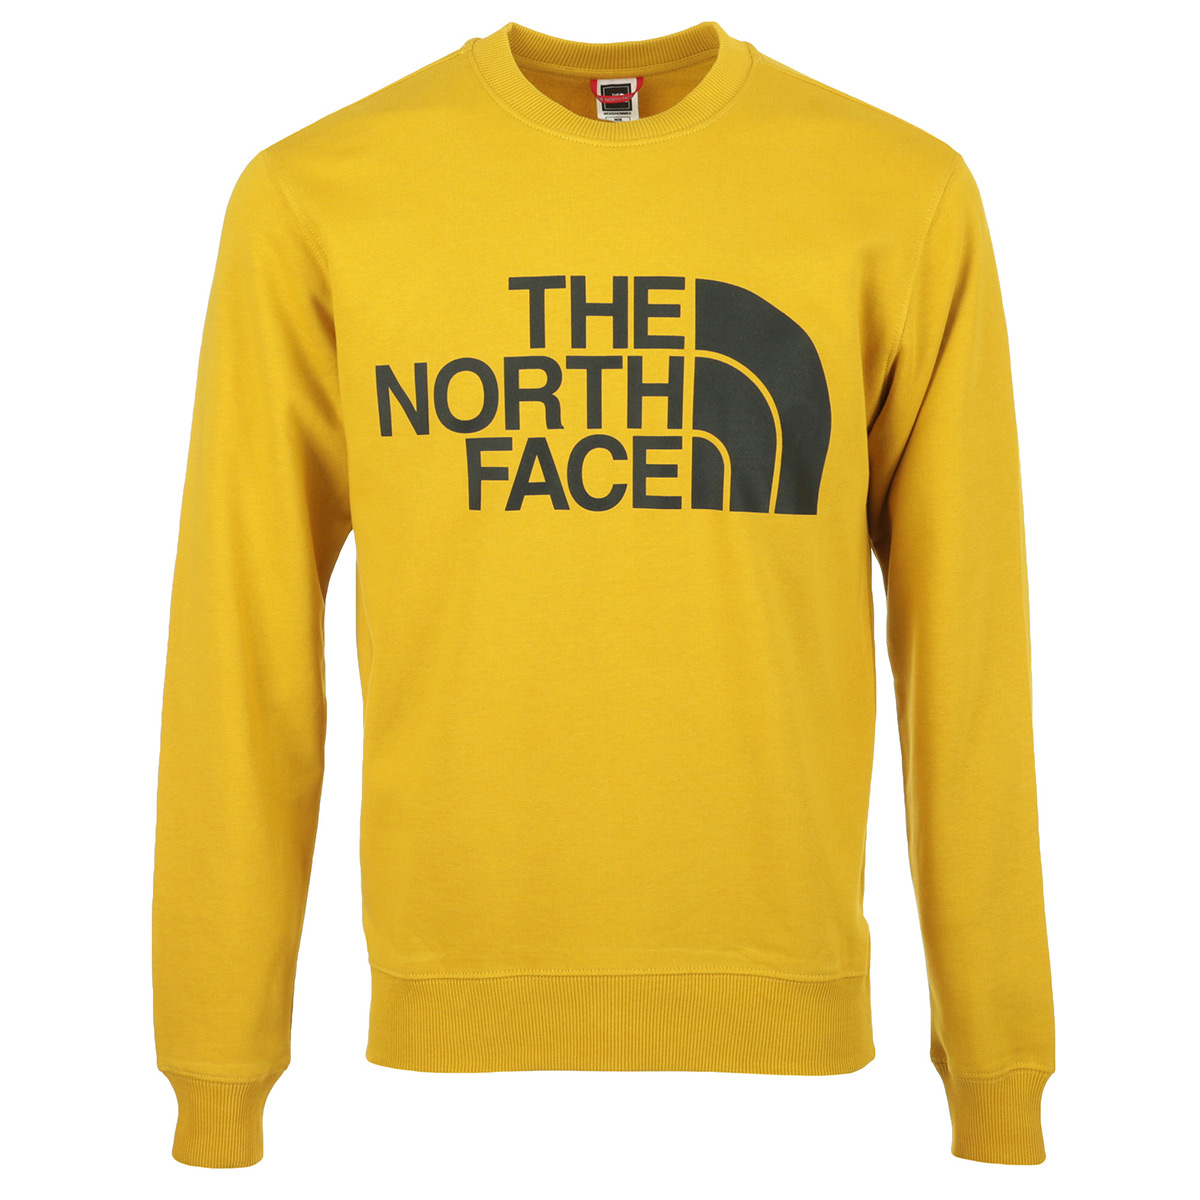 The North Face Standard Crew